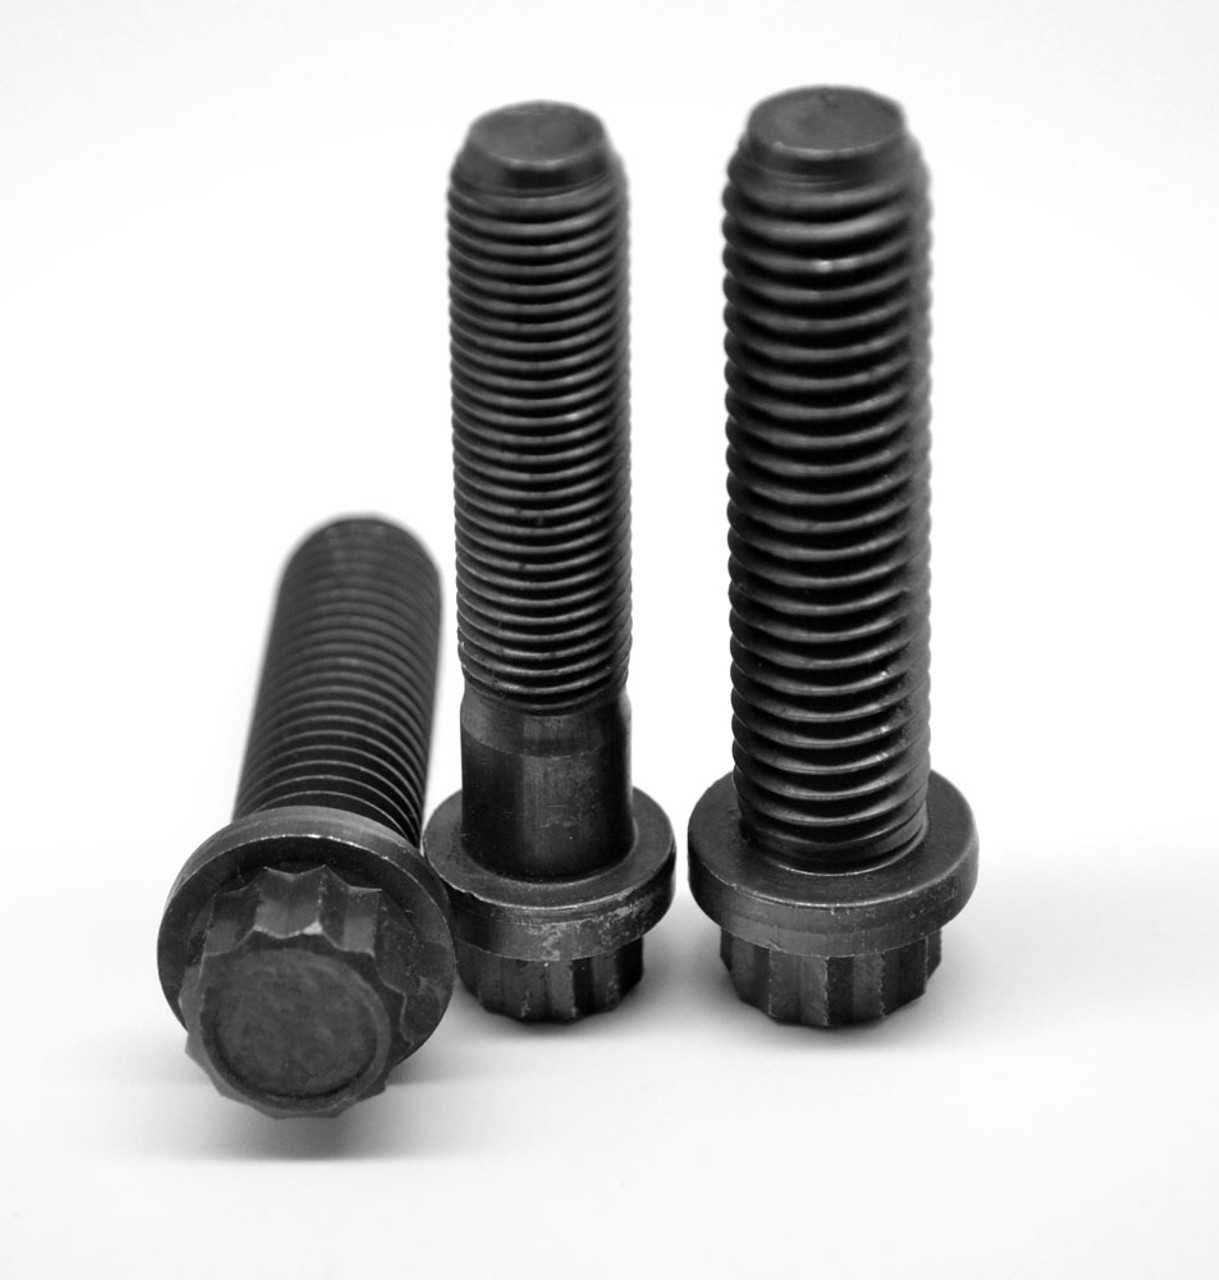 5/8-11 x 3 Coarse Thread 12-Point Flange Screw Alloy Steel Thermal Black Oxide